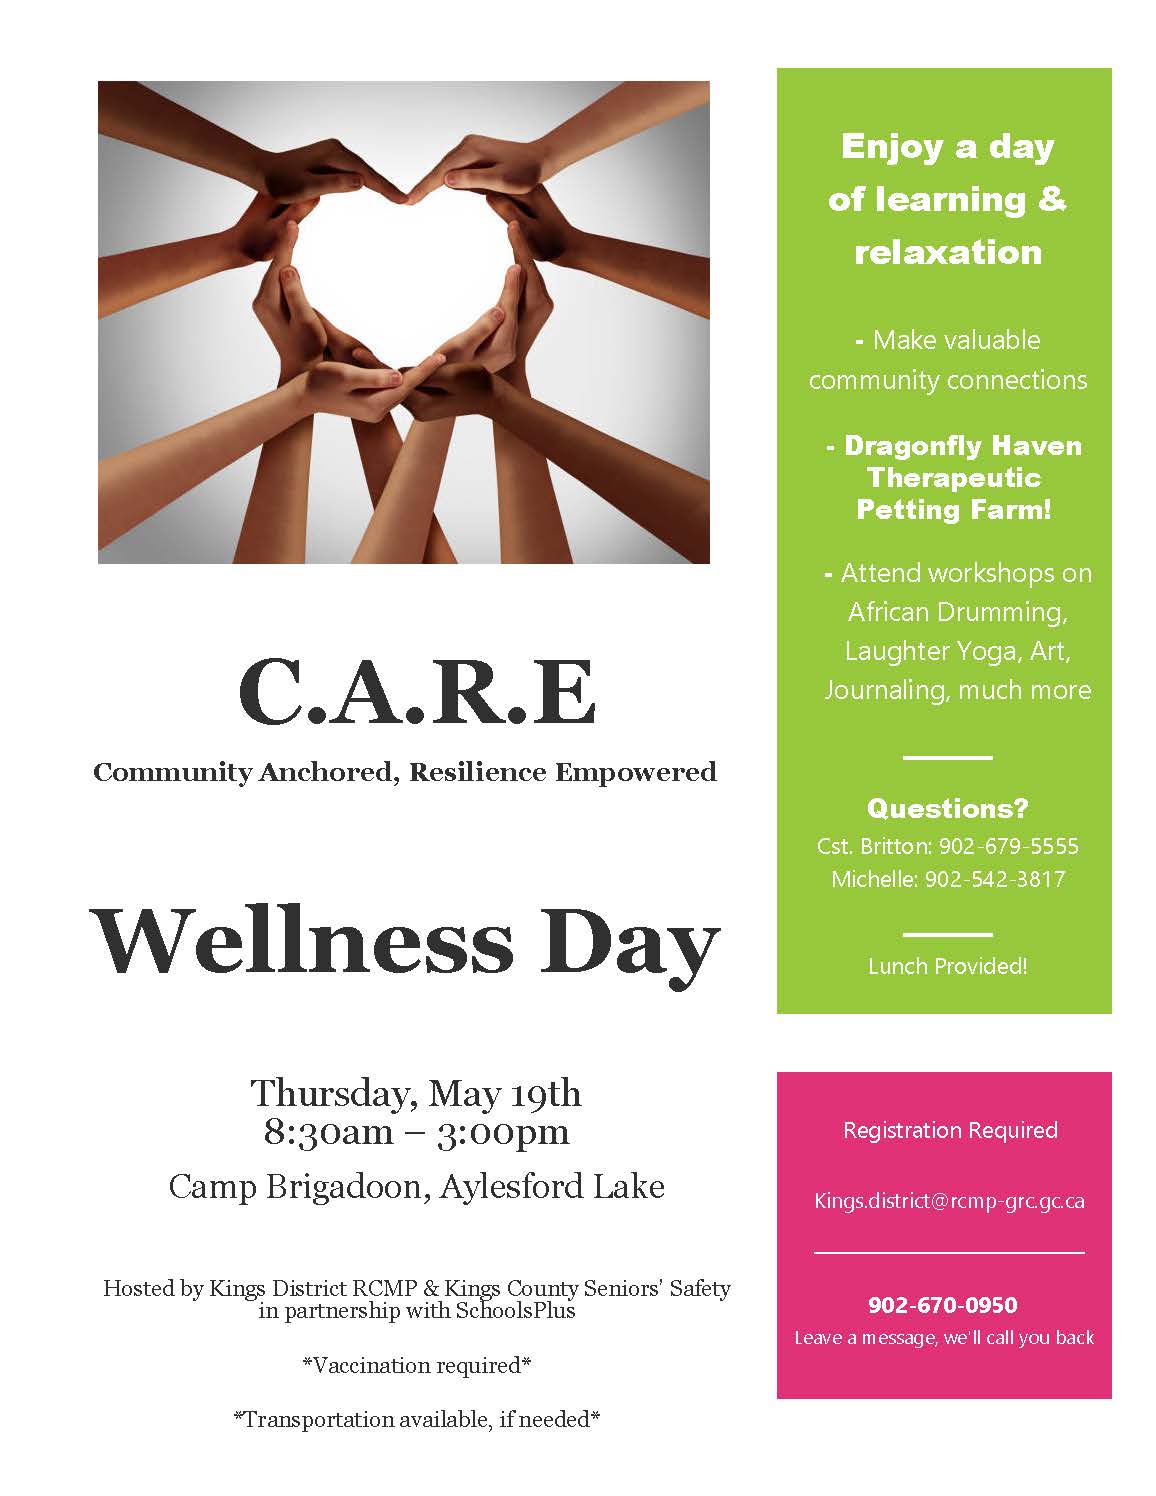 CARE Wellness Day Poster